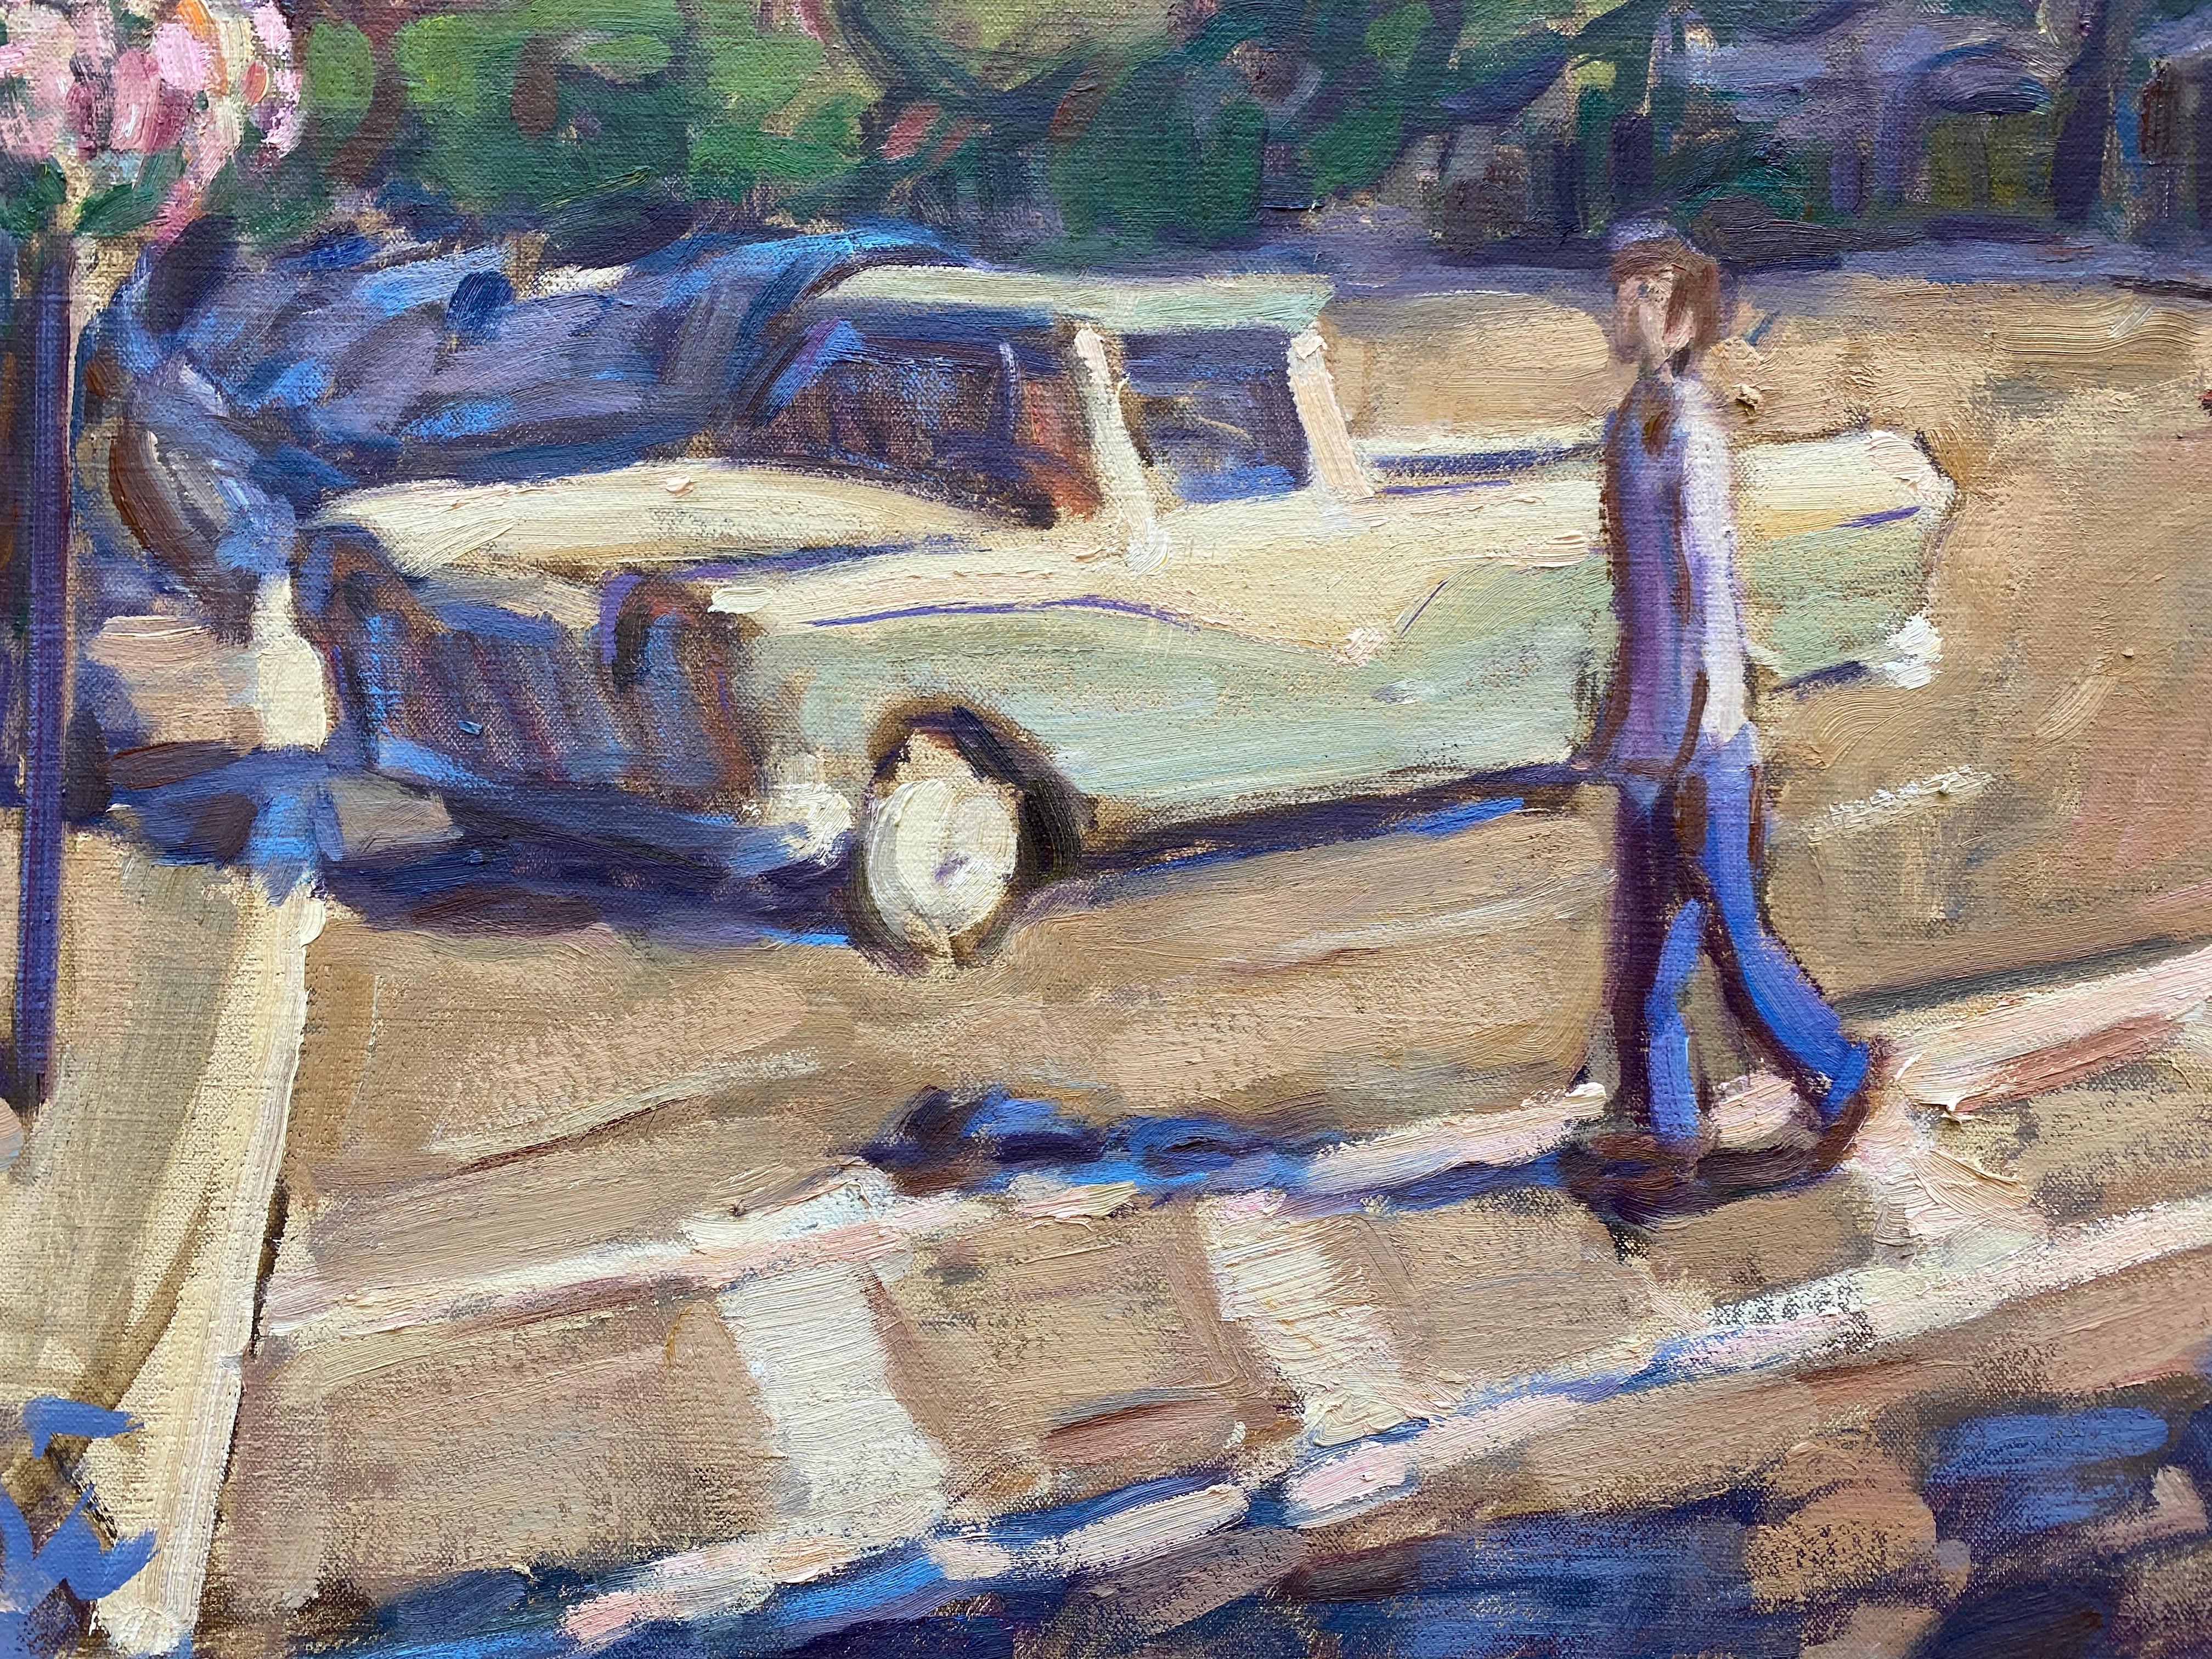 Painted from life in the Village of Sag Harbor, McGuire captures a lively scene. Two figures cross the street, using the crosswalk, one man in jeans and a tee-shirt, and one woman in a red dress. A vintage truck starts a line of parked cars along.